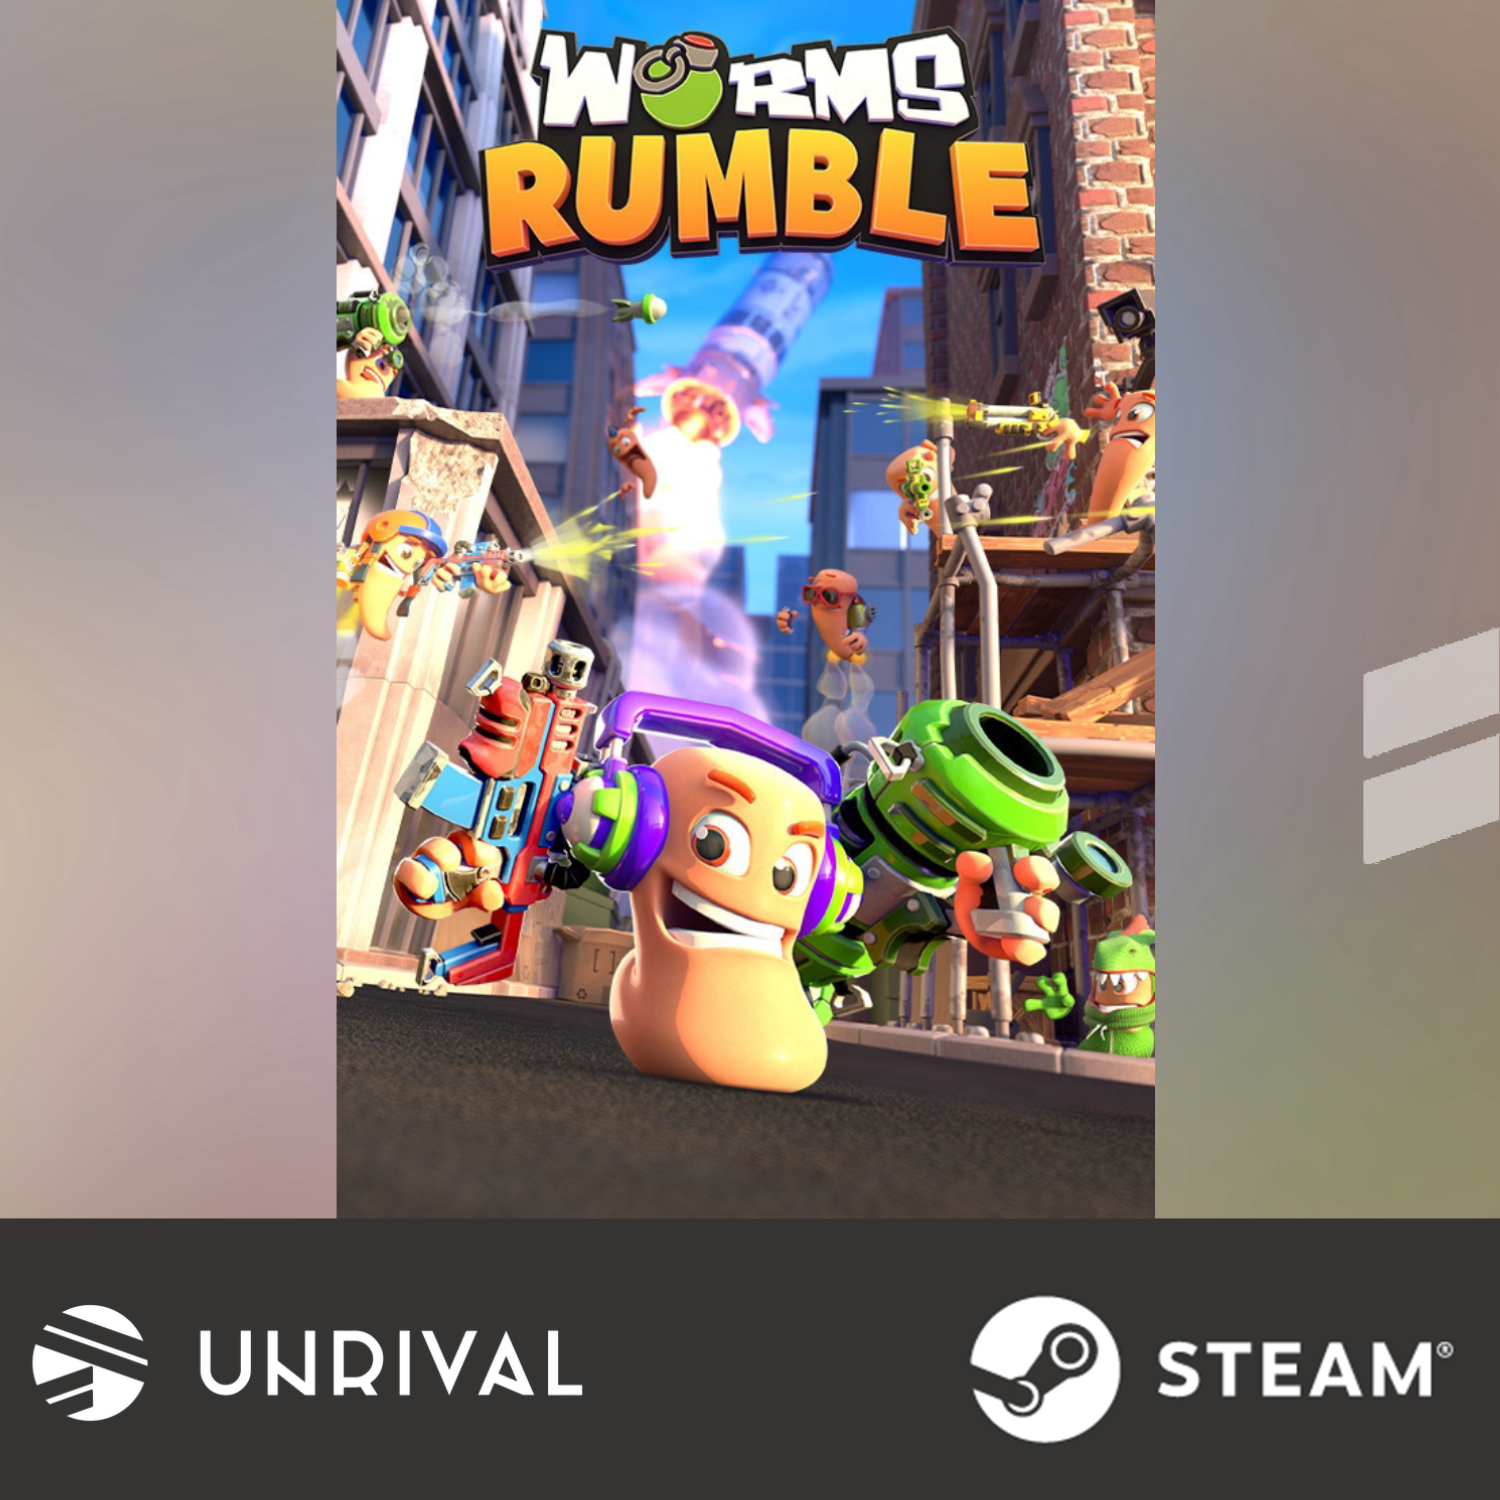 [Preorder] Worms Rumble - Pre Order (Ship By 01 Jan) PC Digital Download Game - Unrival